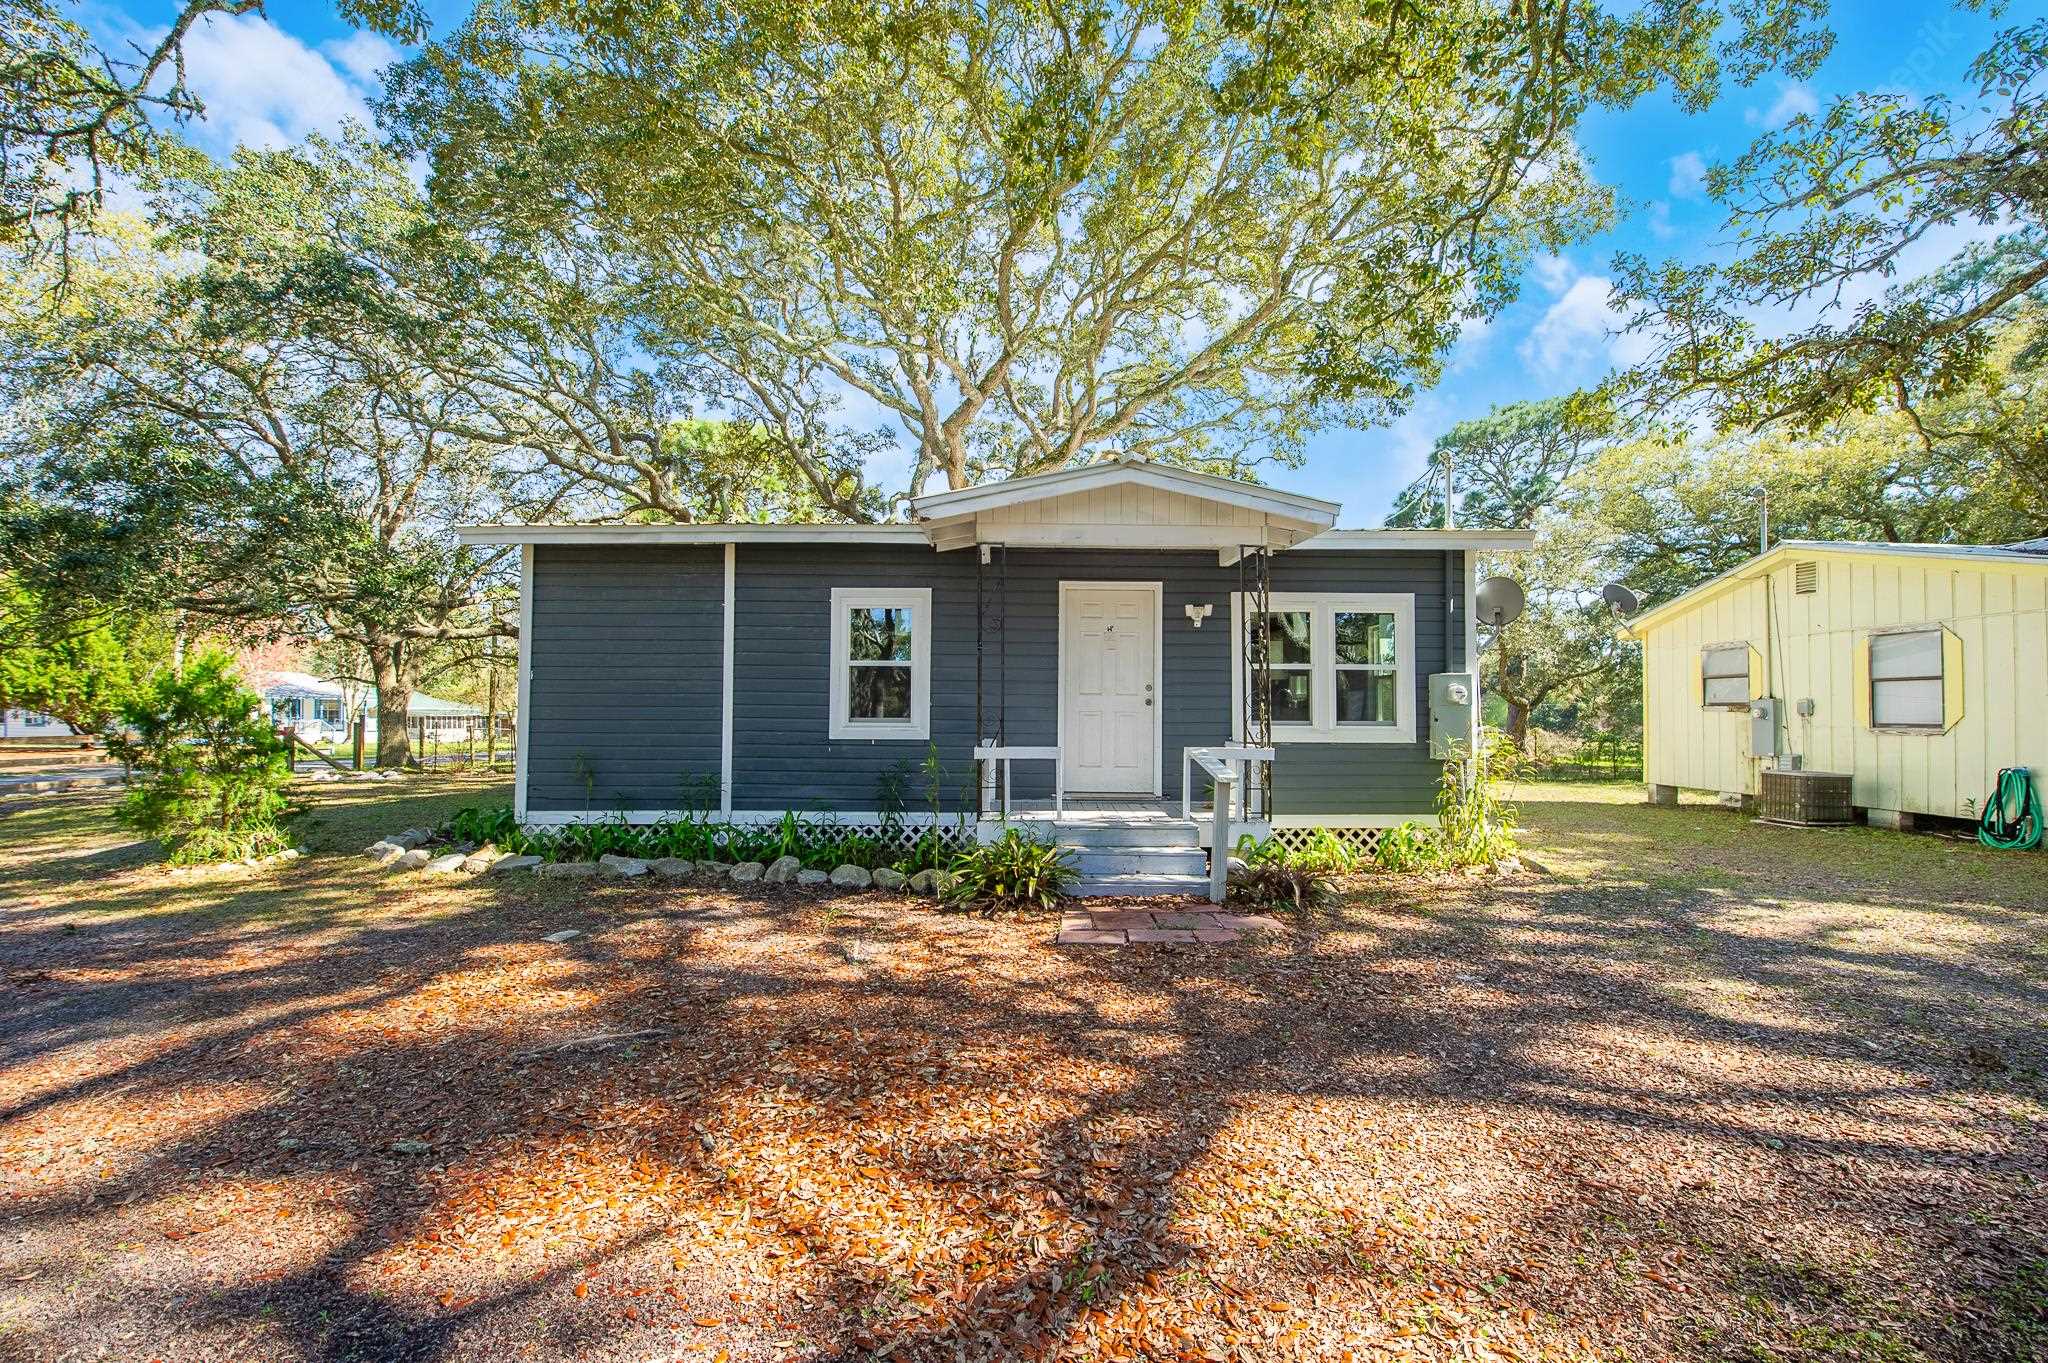 496 Avenue A,EAST POINT,Florida 32328,6 Bedrooms Bedrooms,1 BathroomBathrooms,Multi-family,Avenue A,369779